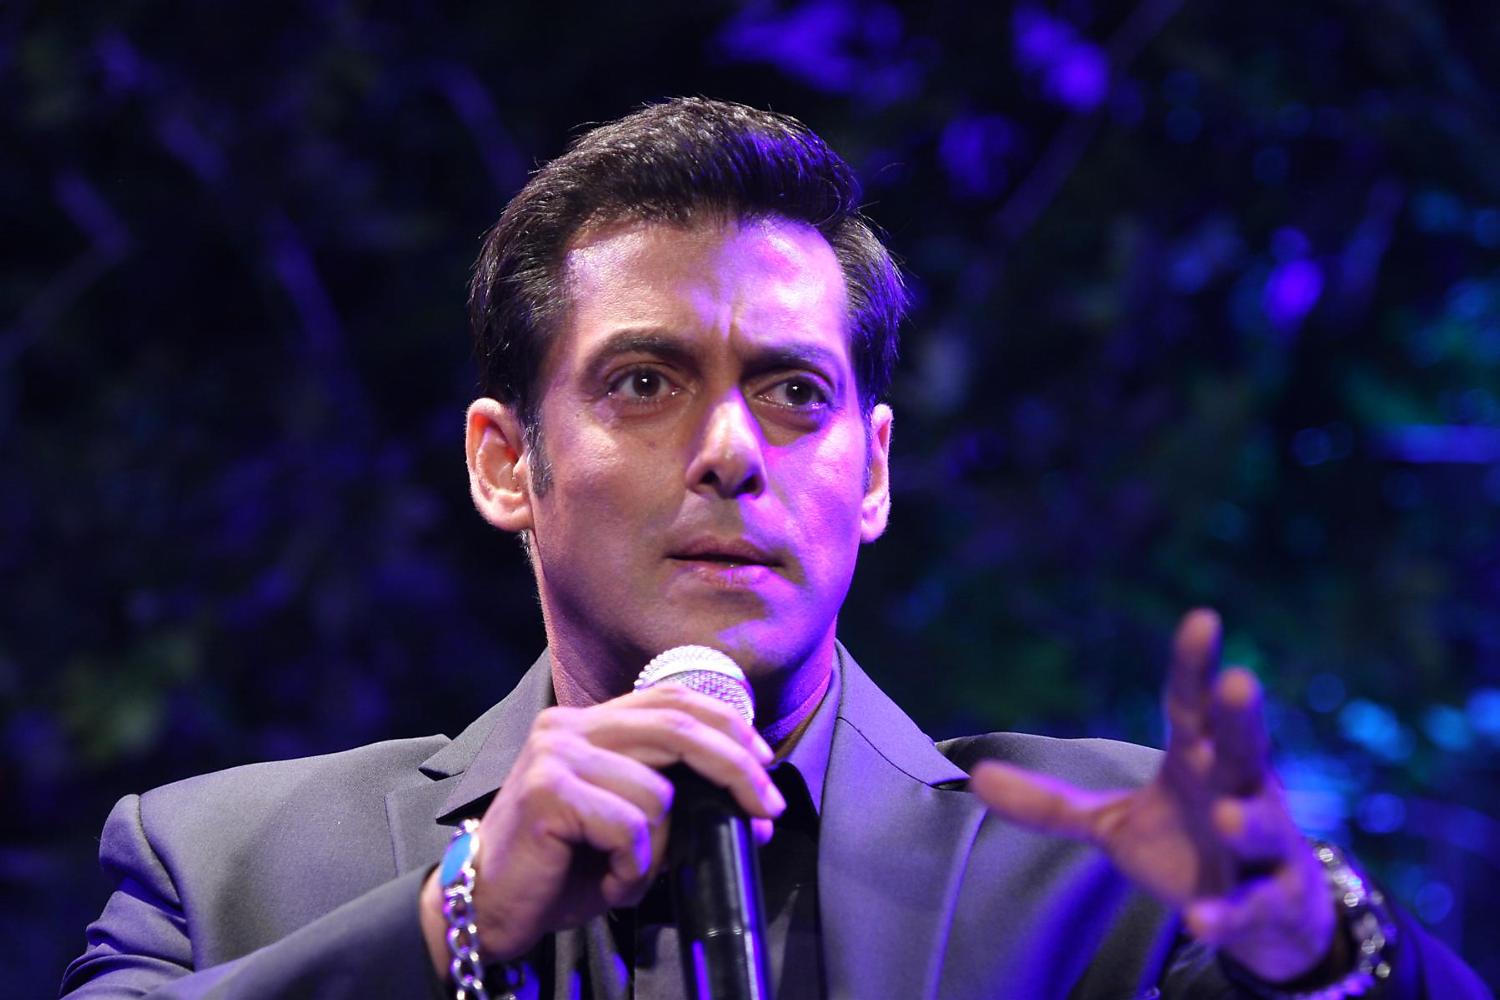 Read: Salman's crazy reply to question related to Aishwarya